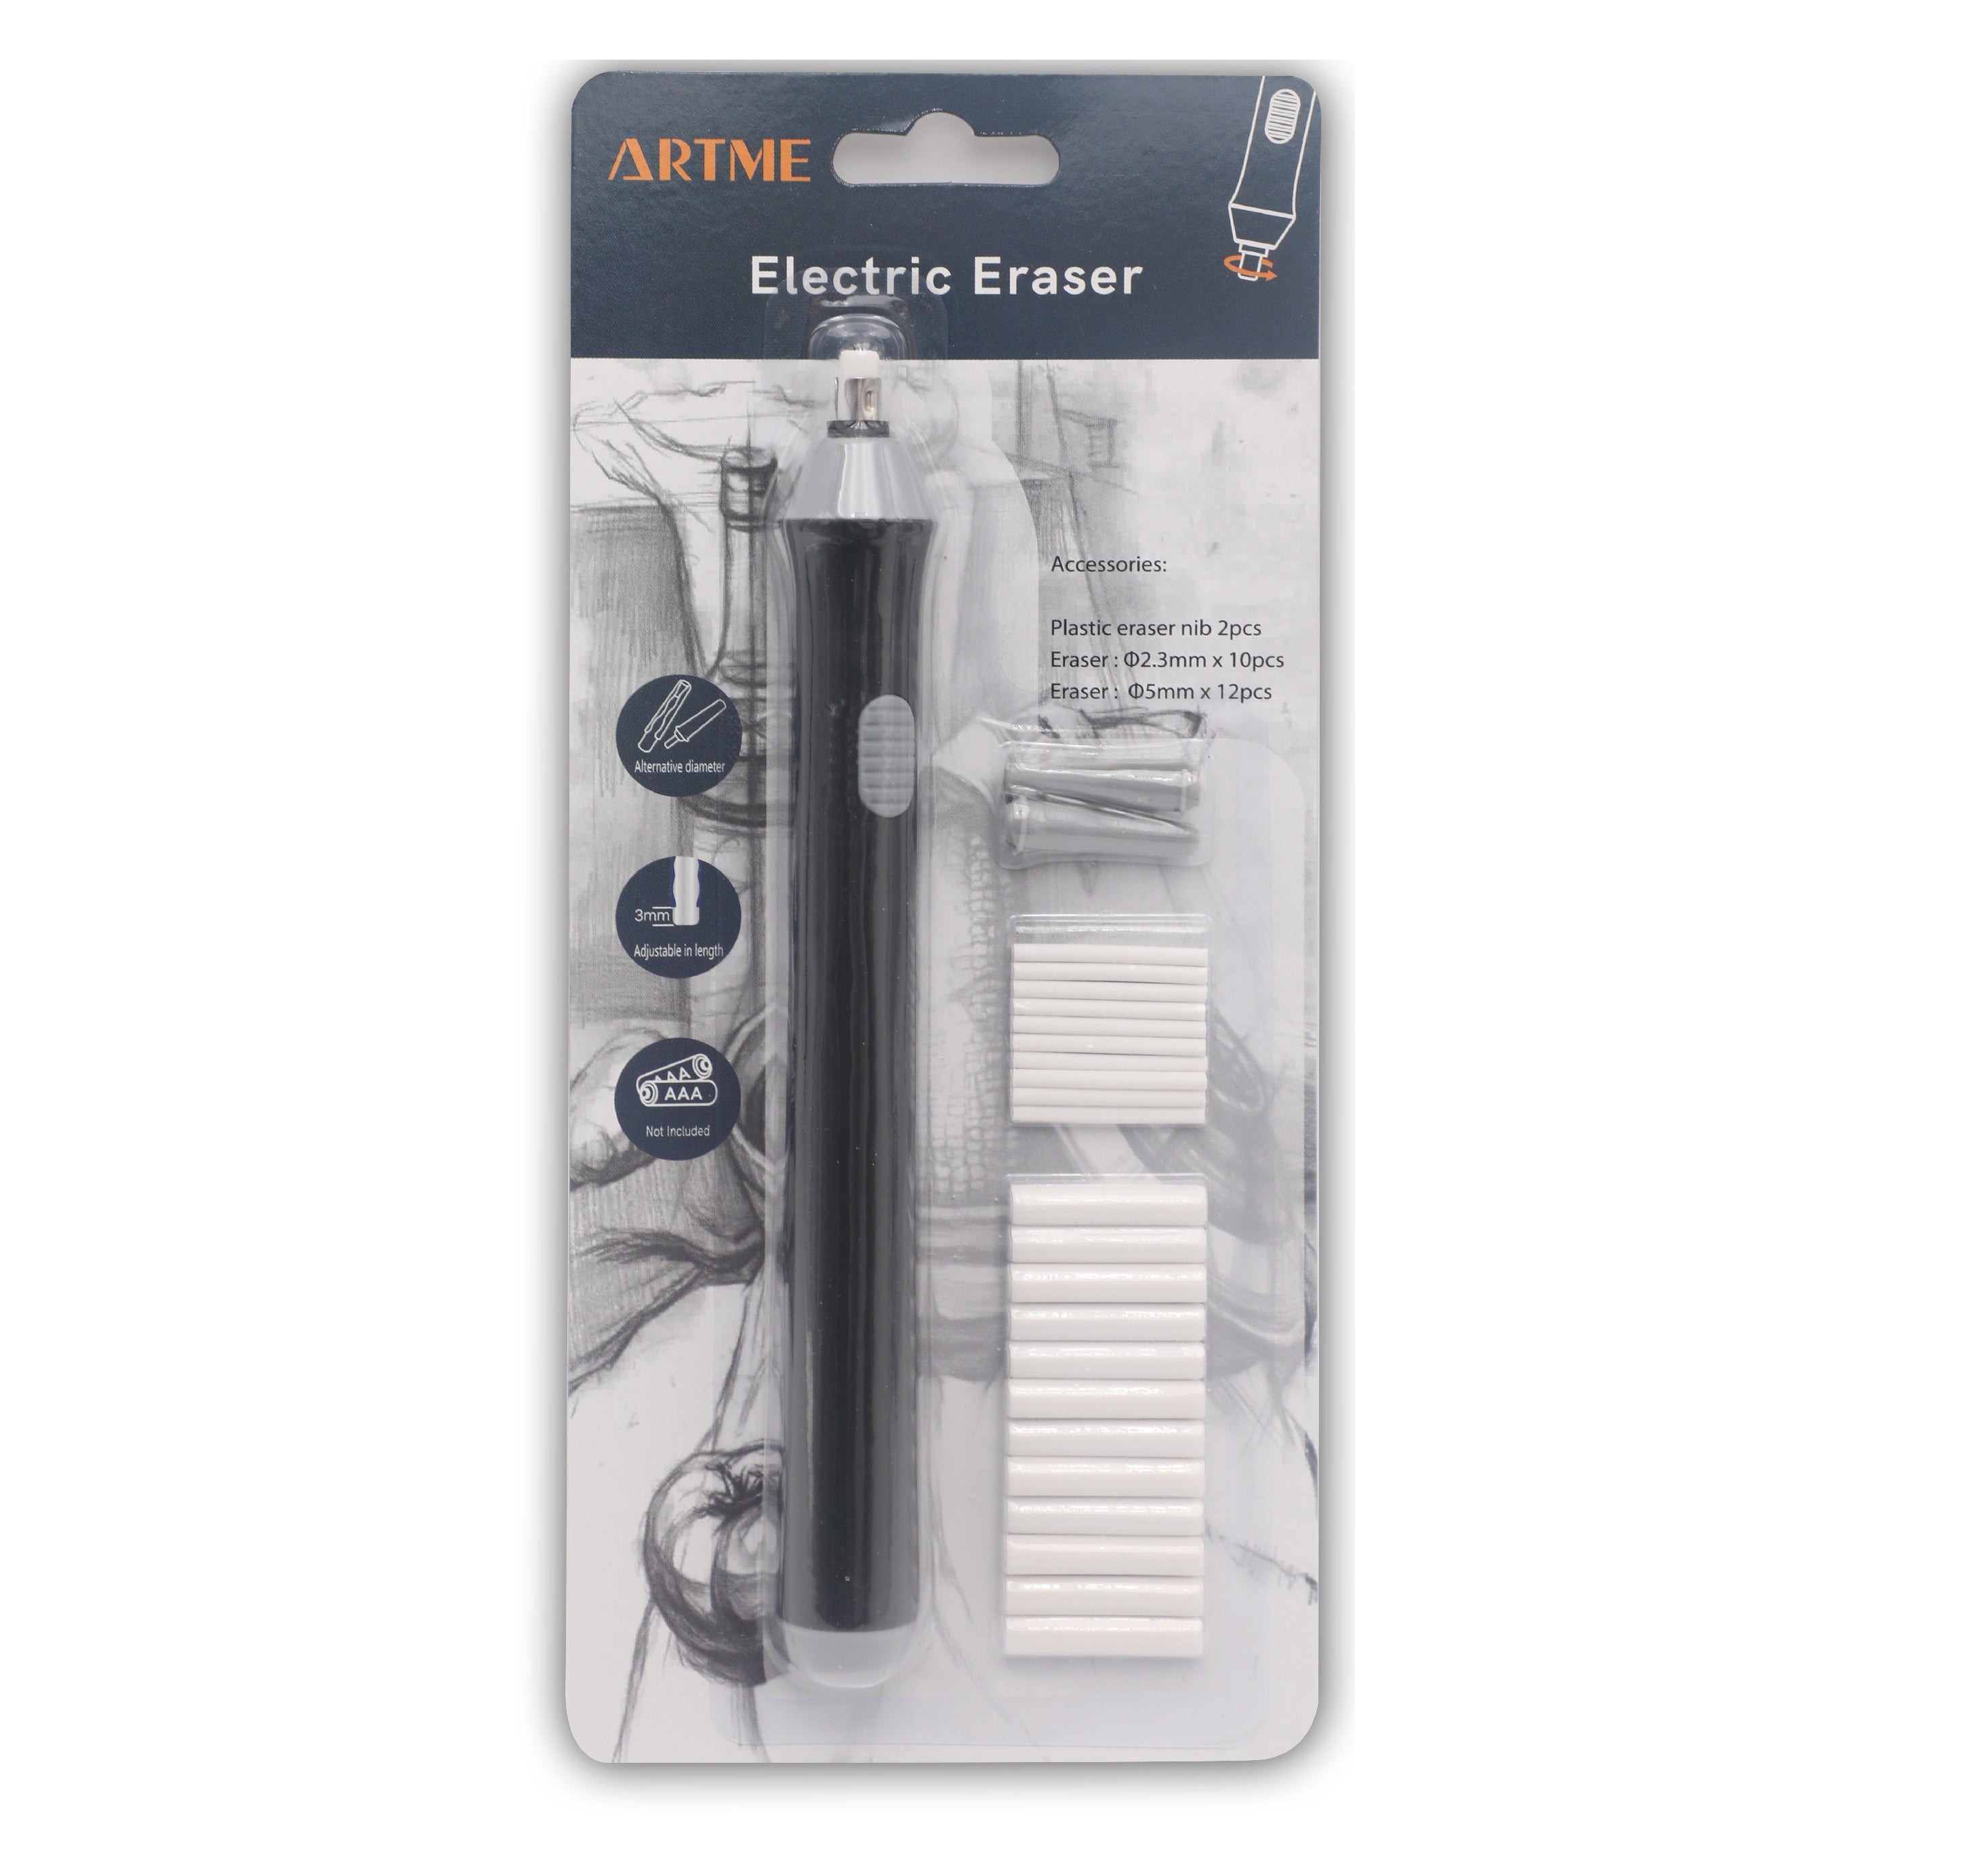 Artme Electric Eraser Automatic Portable Rubber, 22pcs refills included